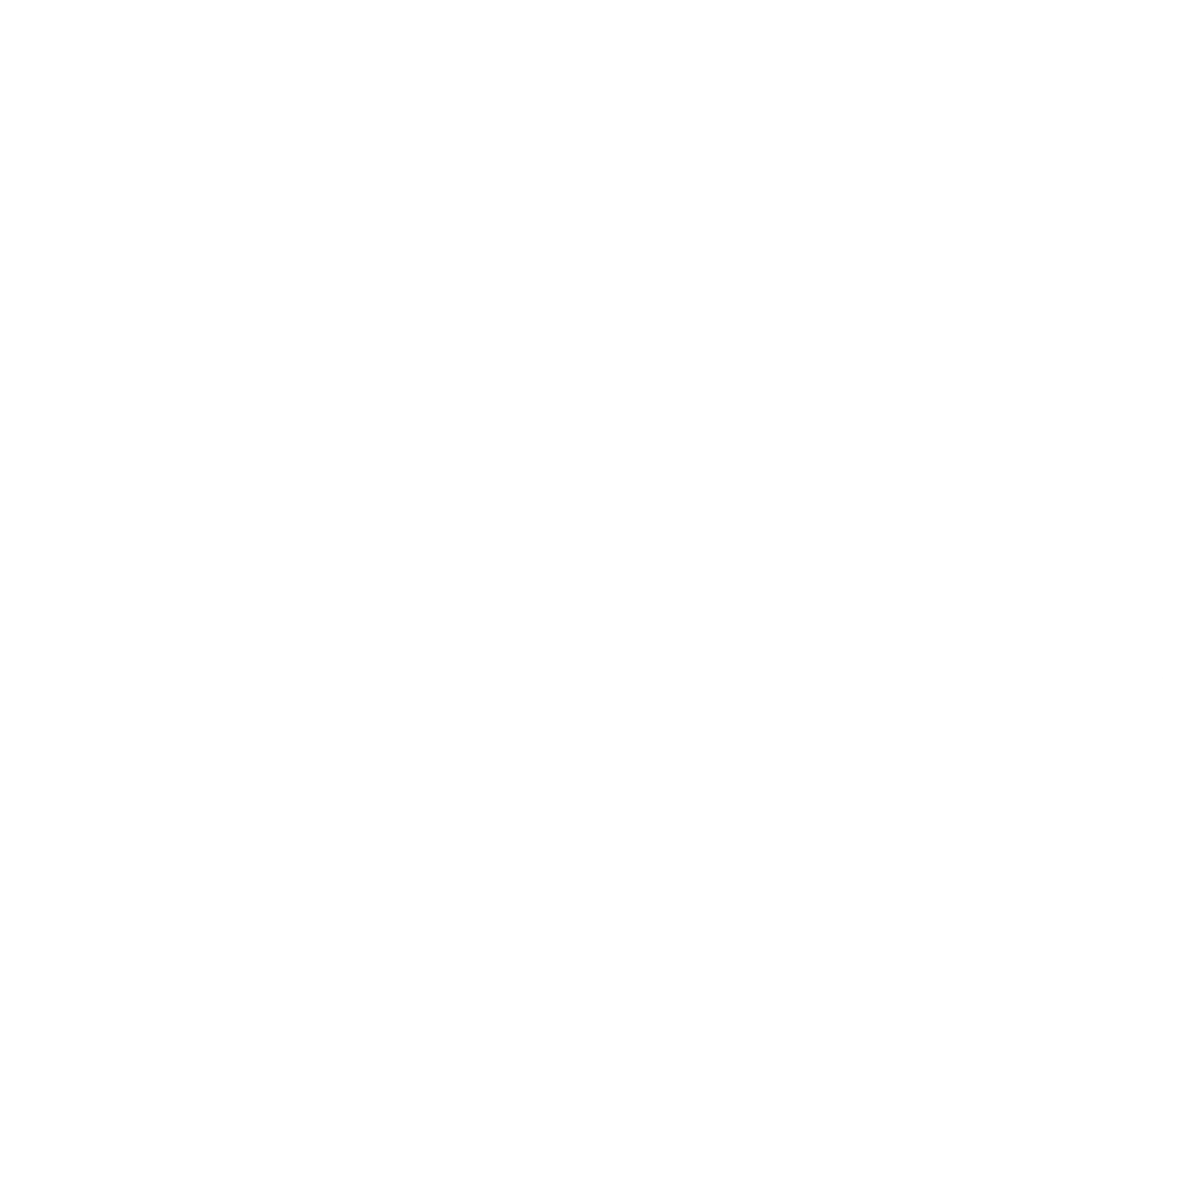 T-Mobile-Logo.png